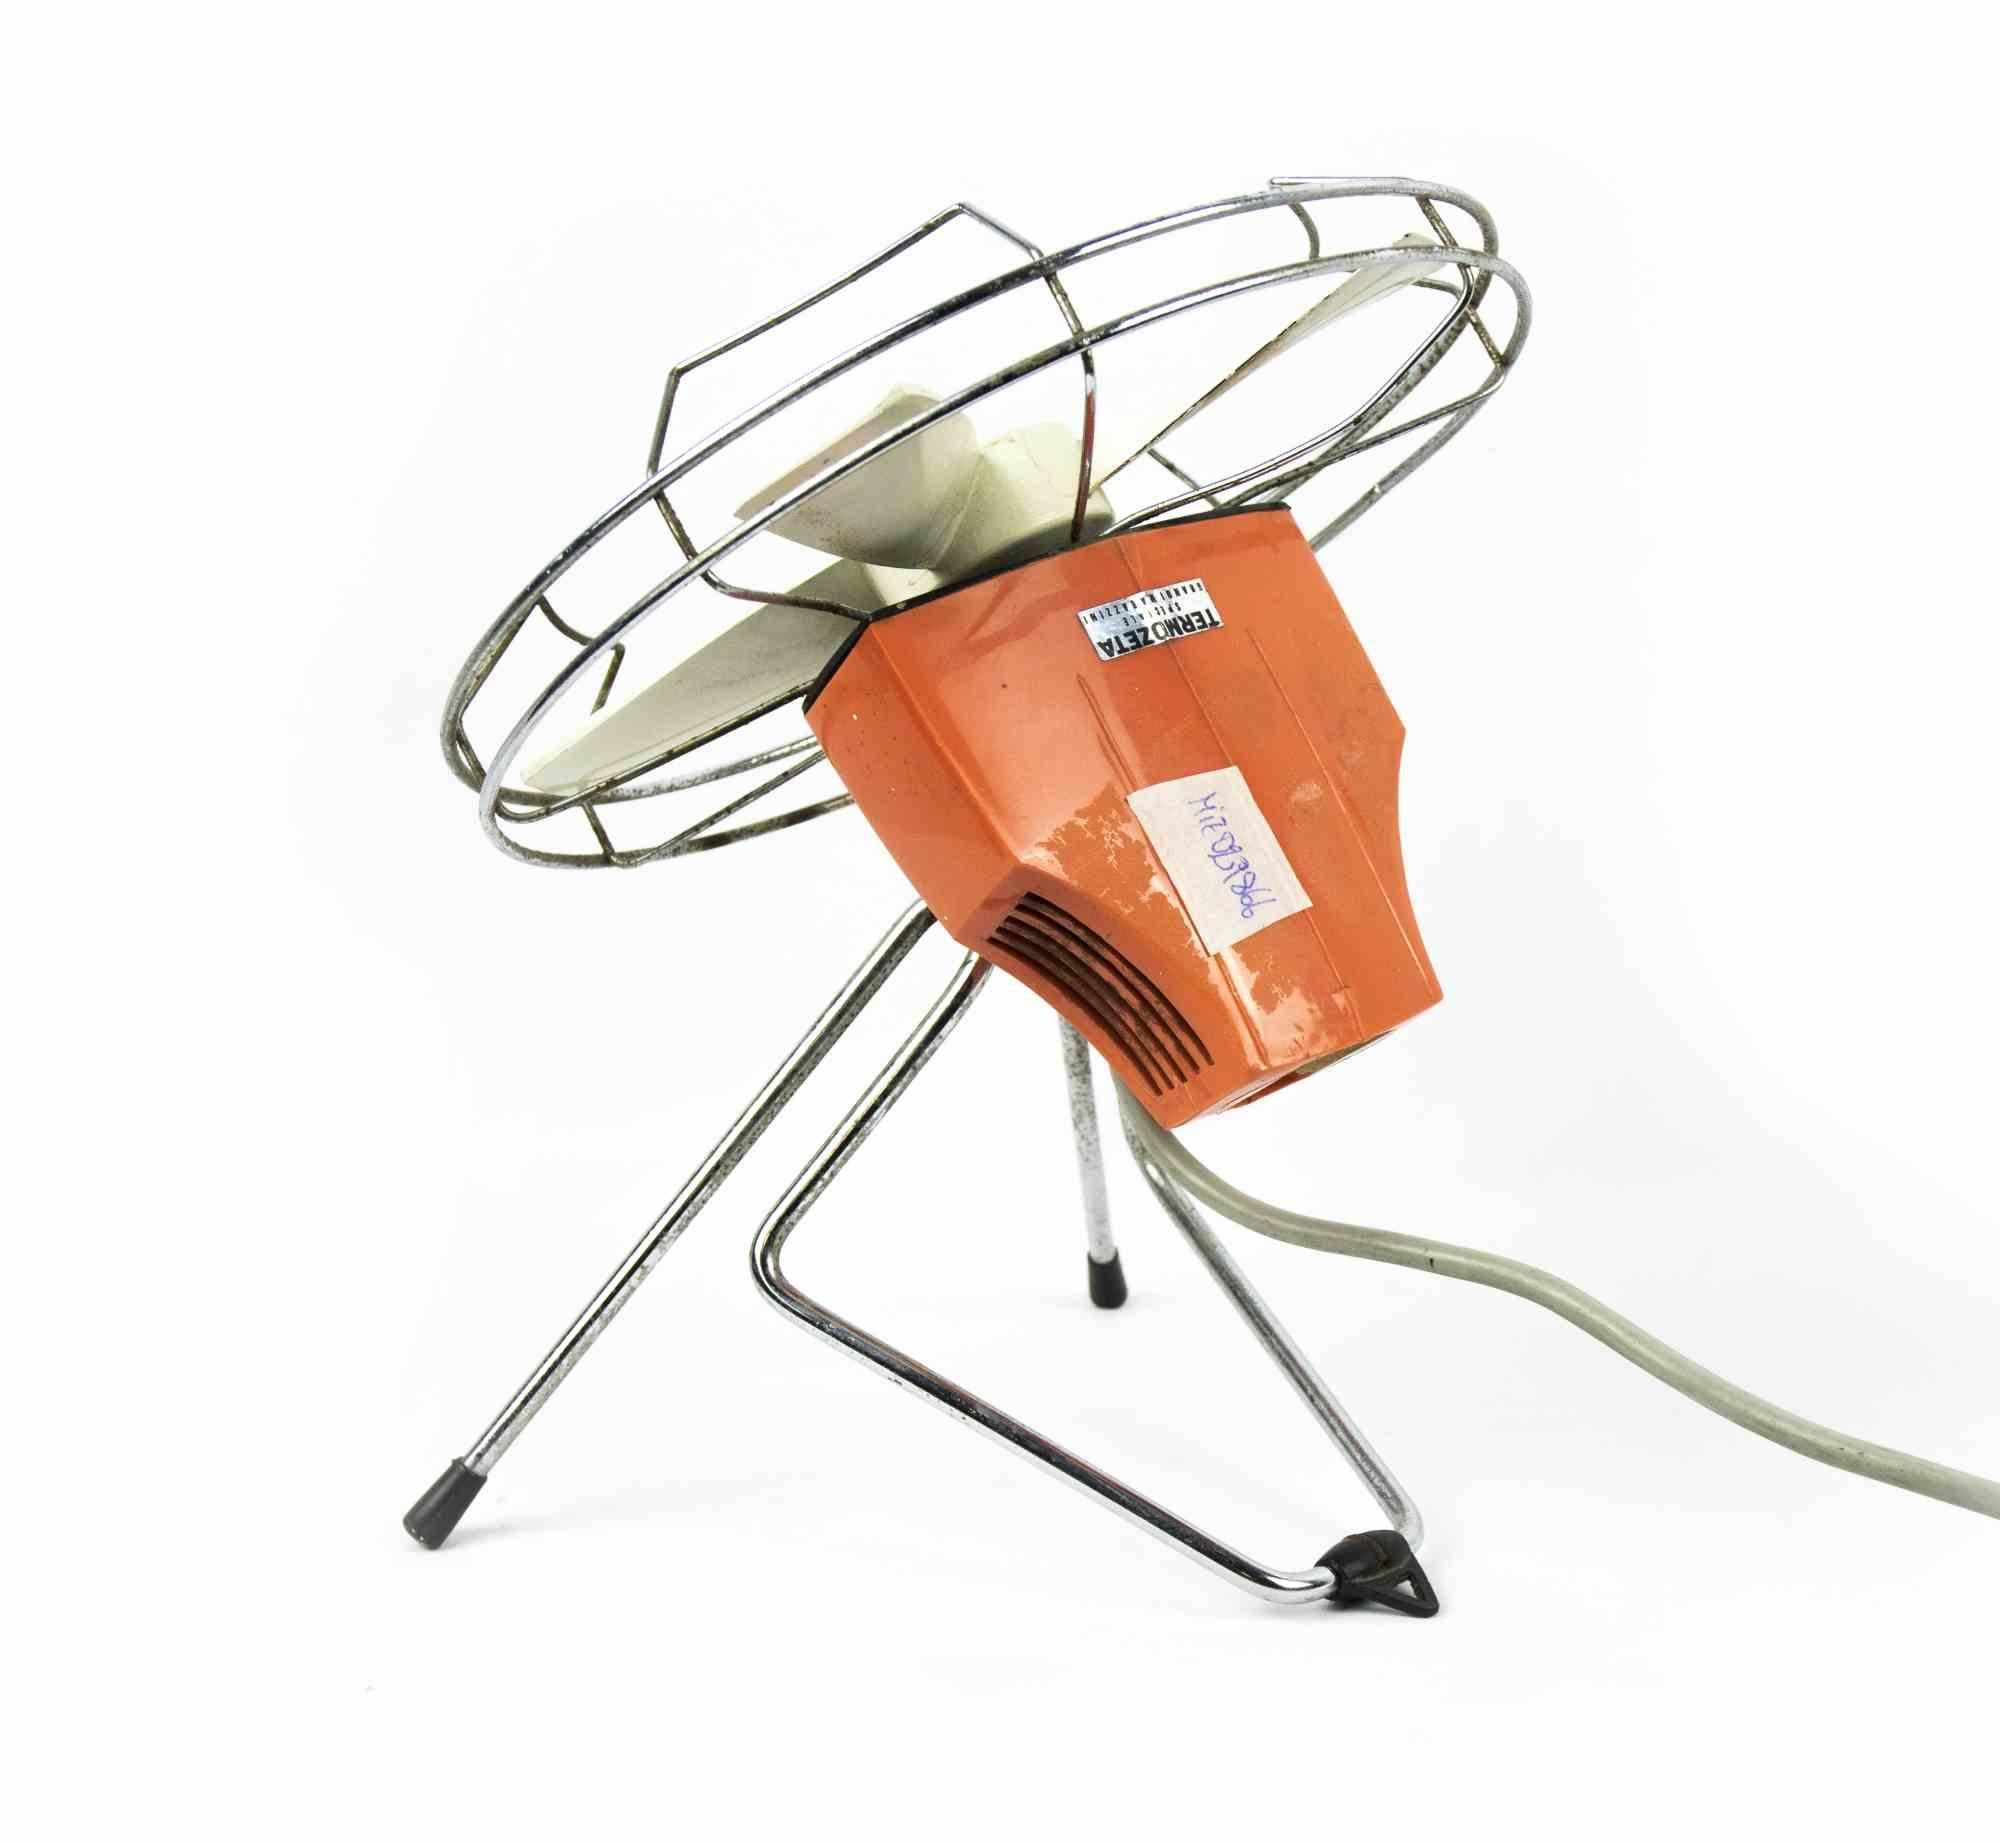 Termozeta vintage fan is an original decorative object realized in the 1970s.

Vintage fan with orange plastic details produced by Termozeta.

Mint conditions..